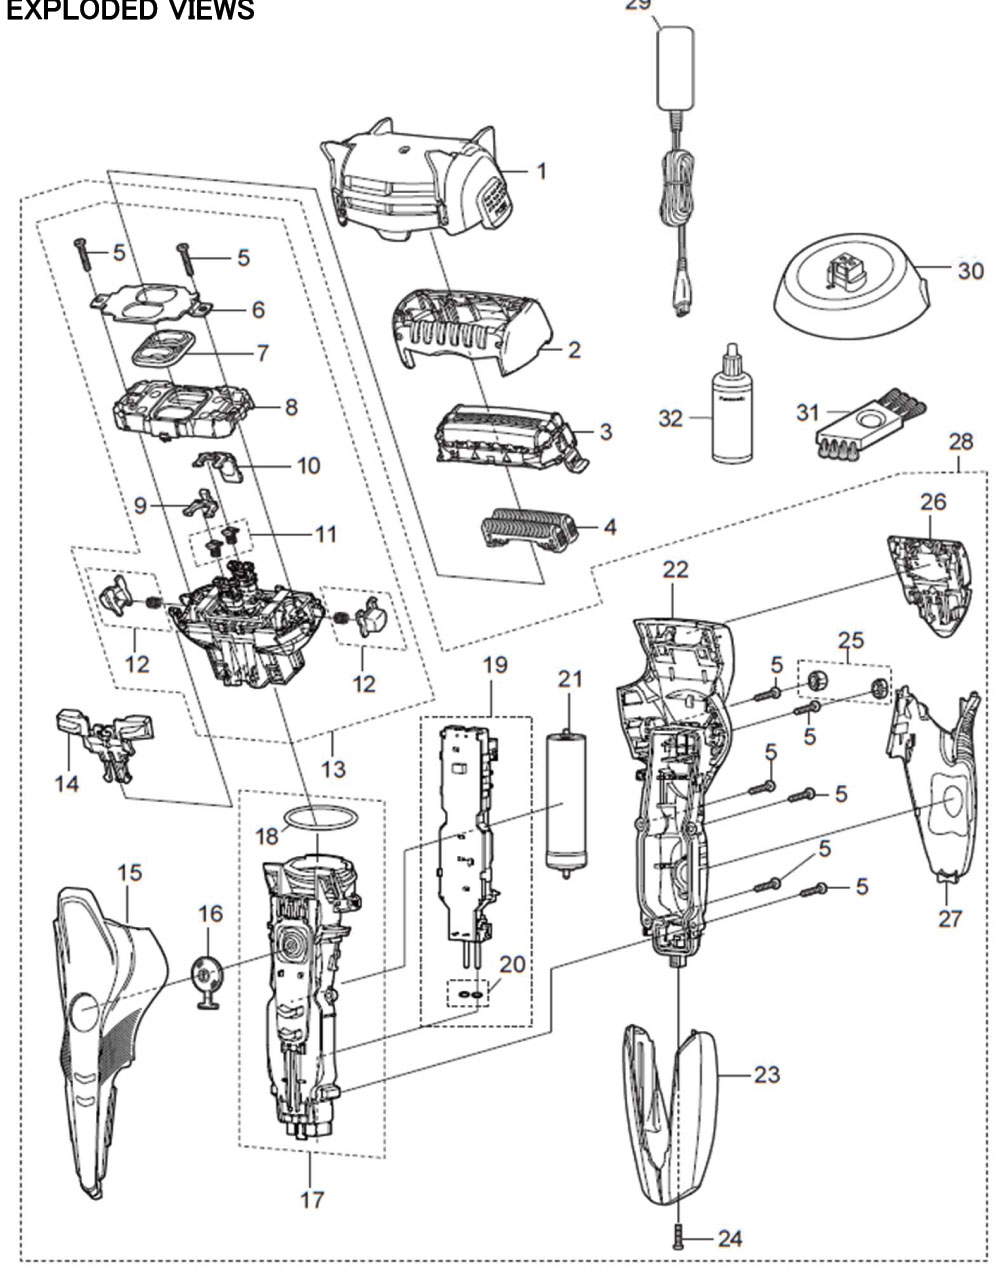 ES-ST3: Exploded View